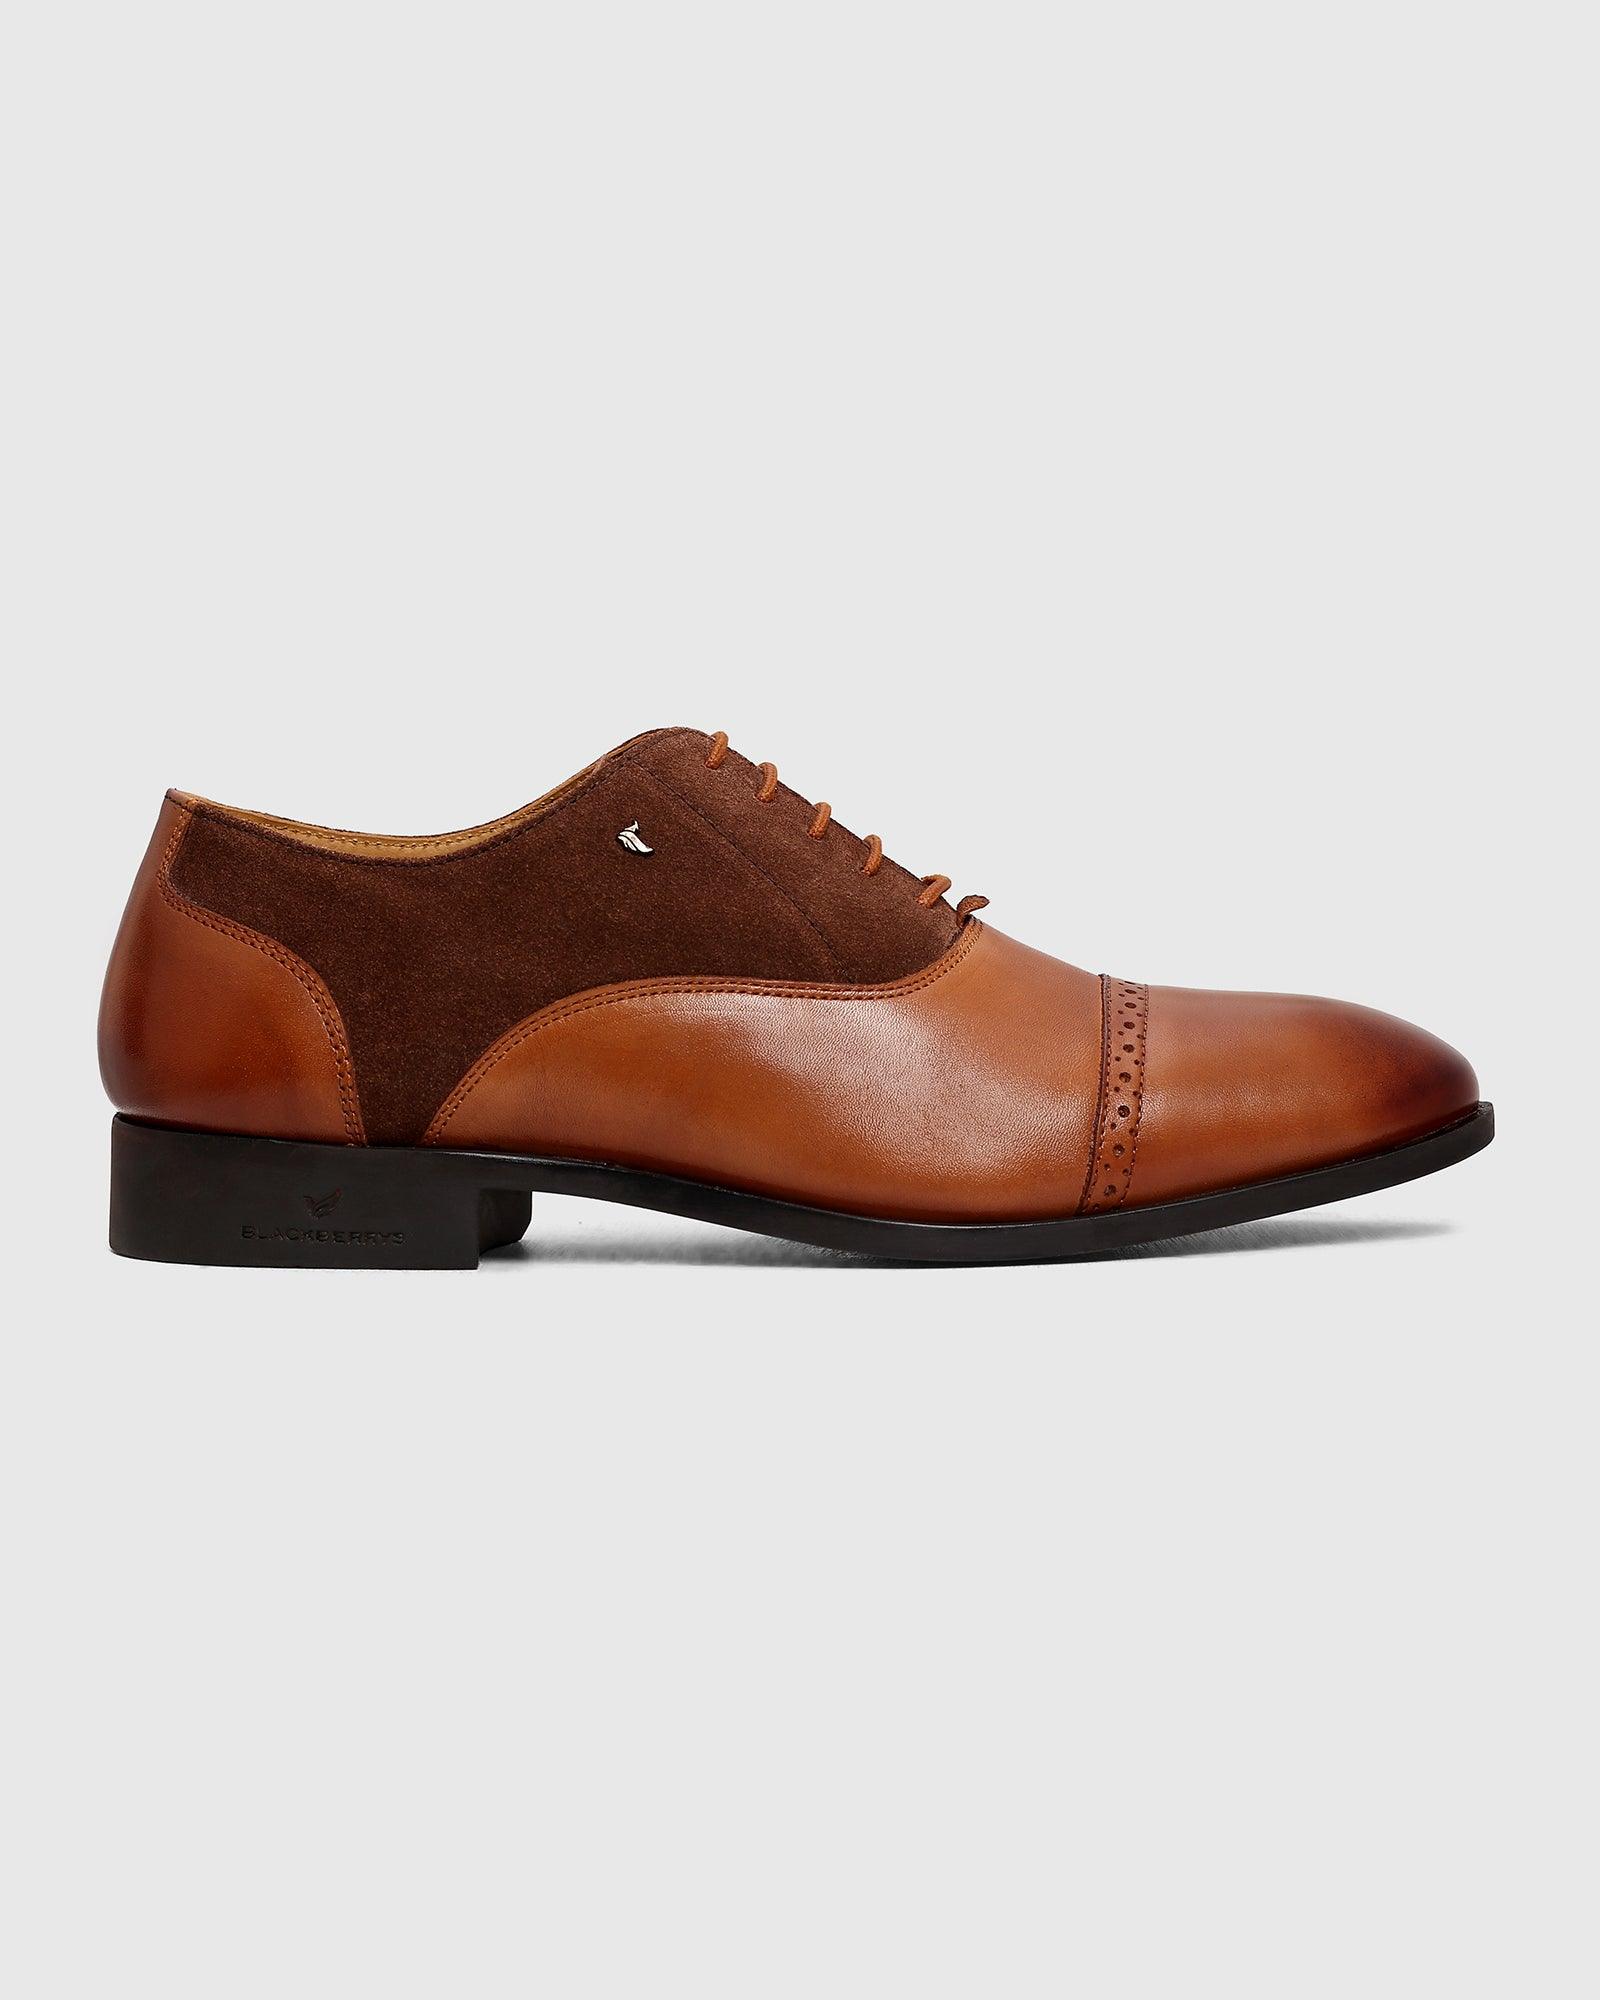 Leather Formal Tan Solid Oxford Shoes - Pager